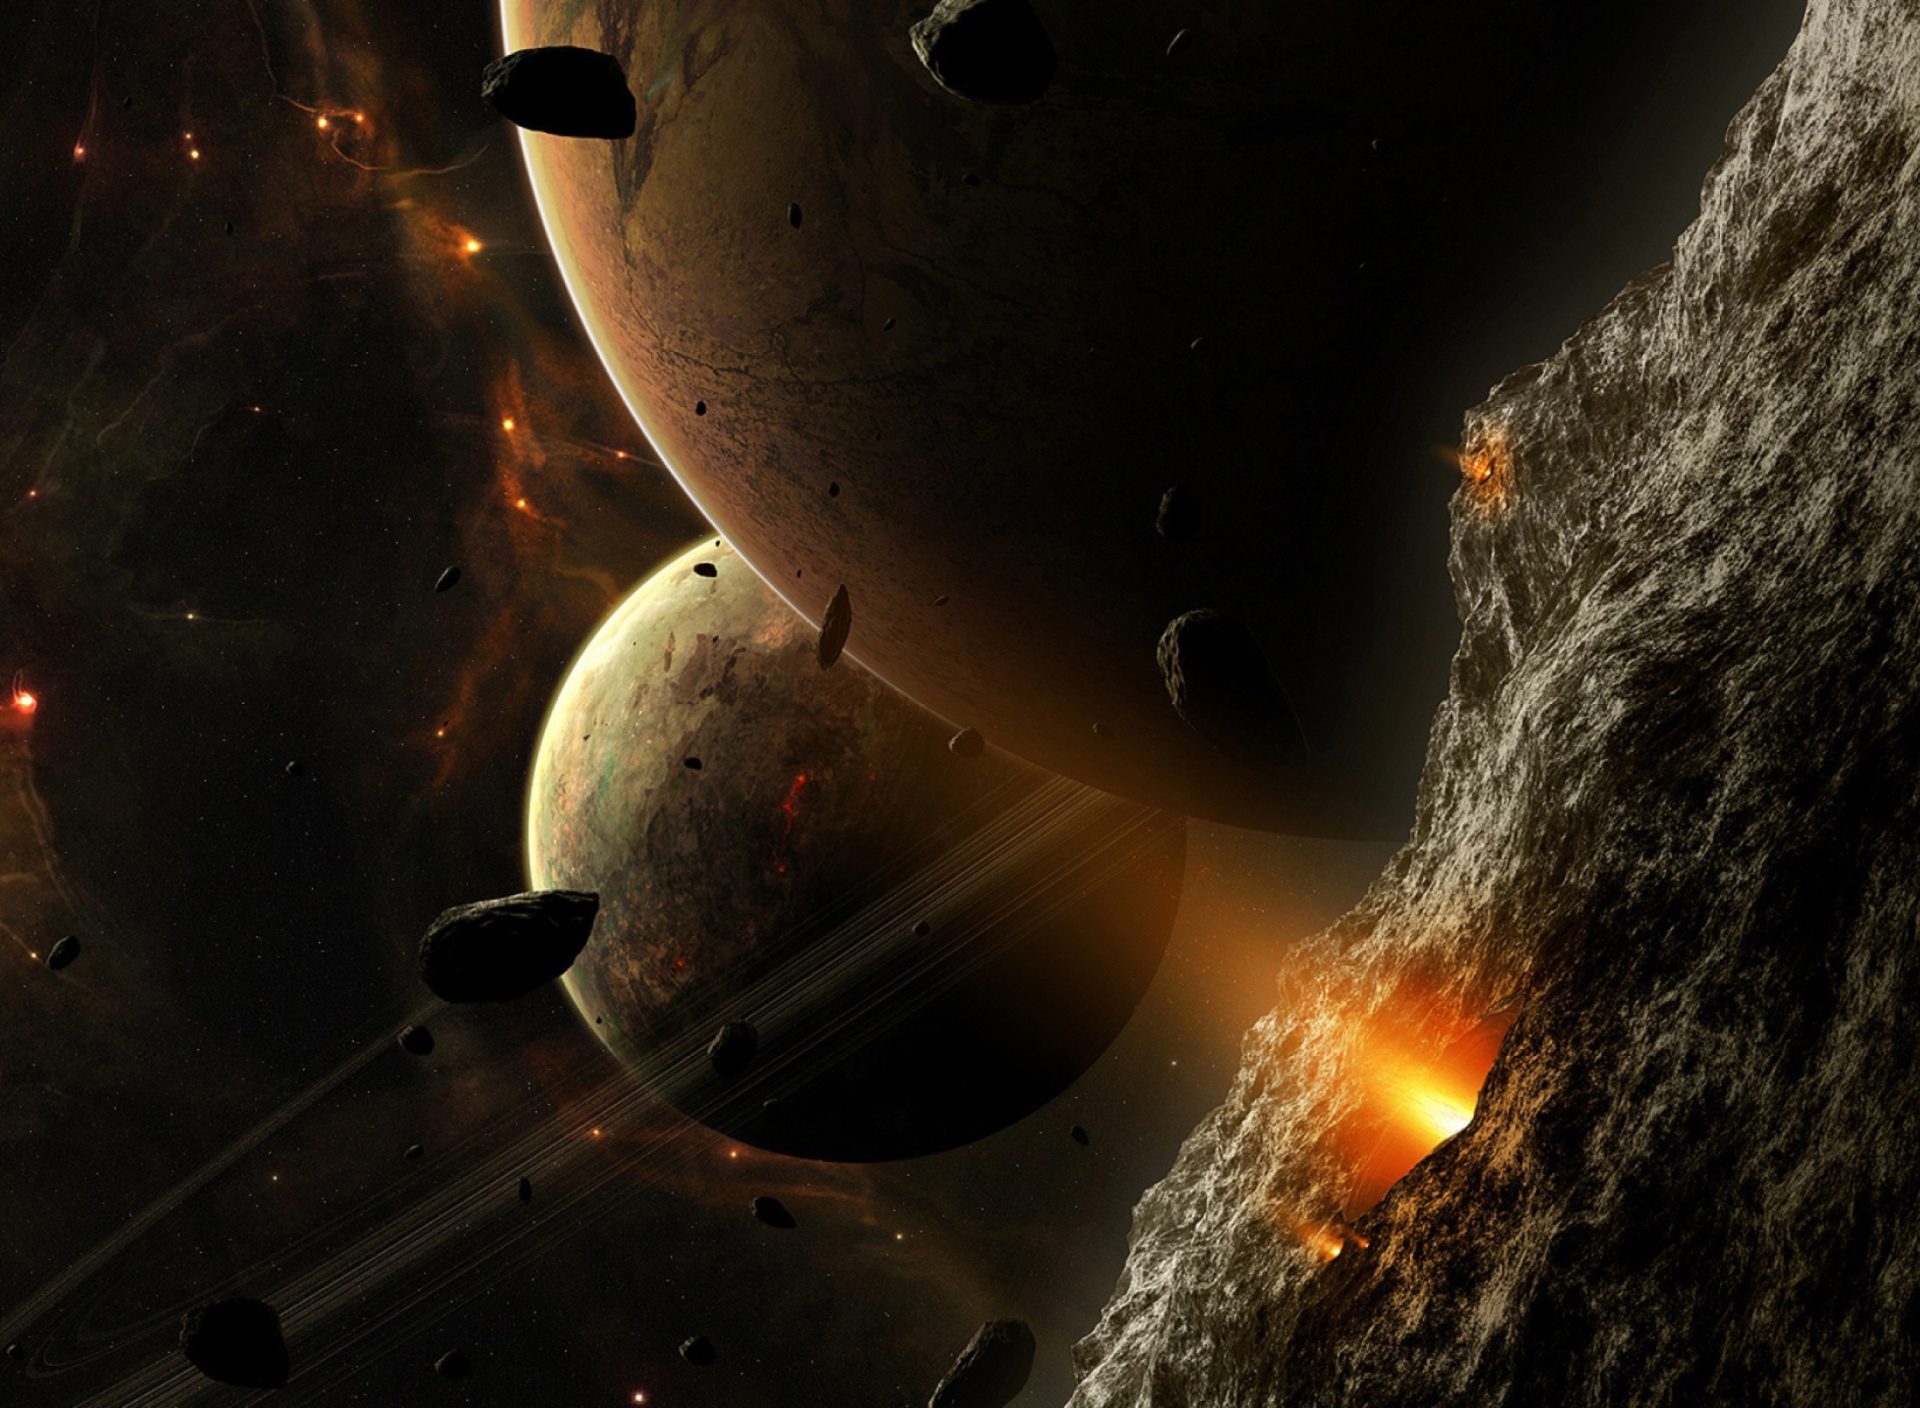 Asteroids And Planets screenshot #1 1920x1408